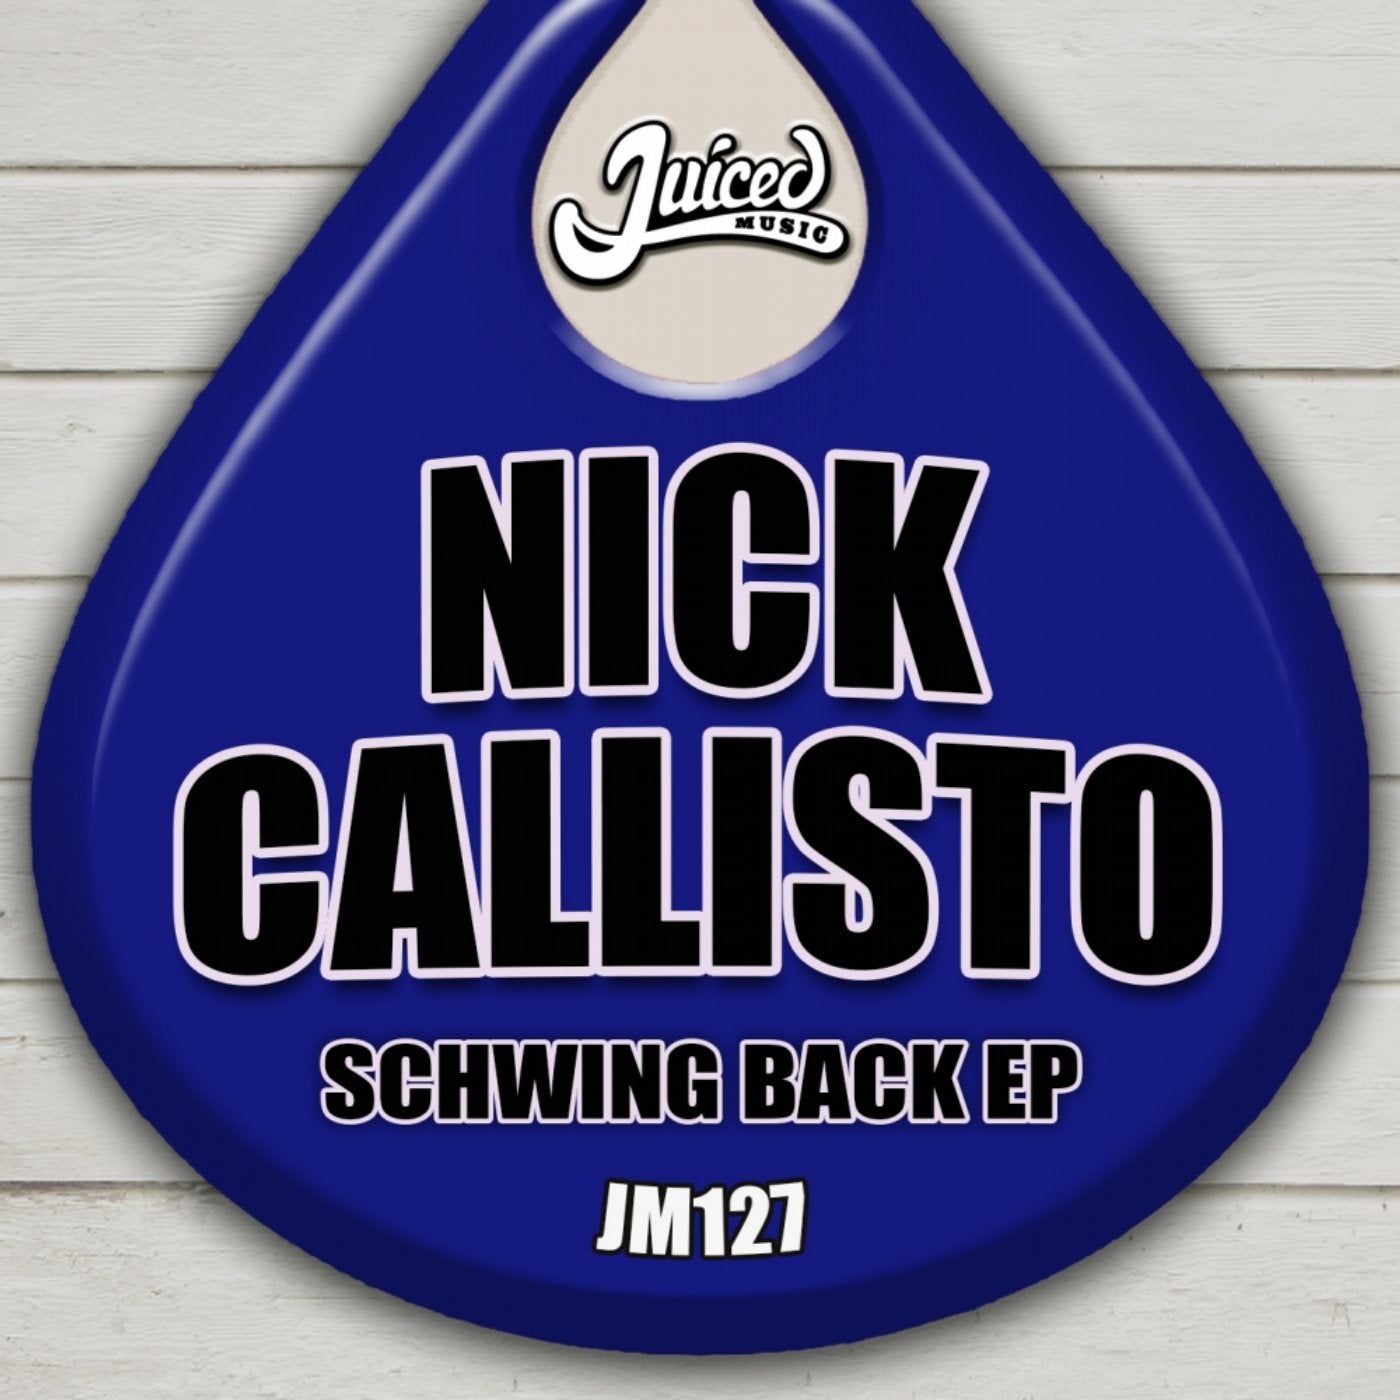 Schwing Back EP